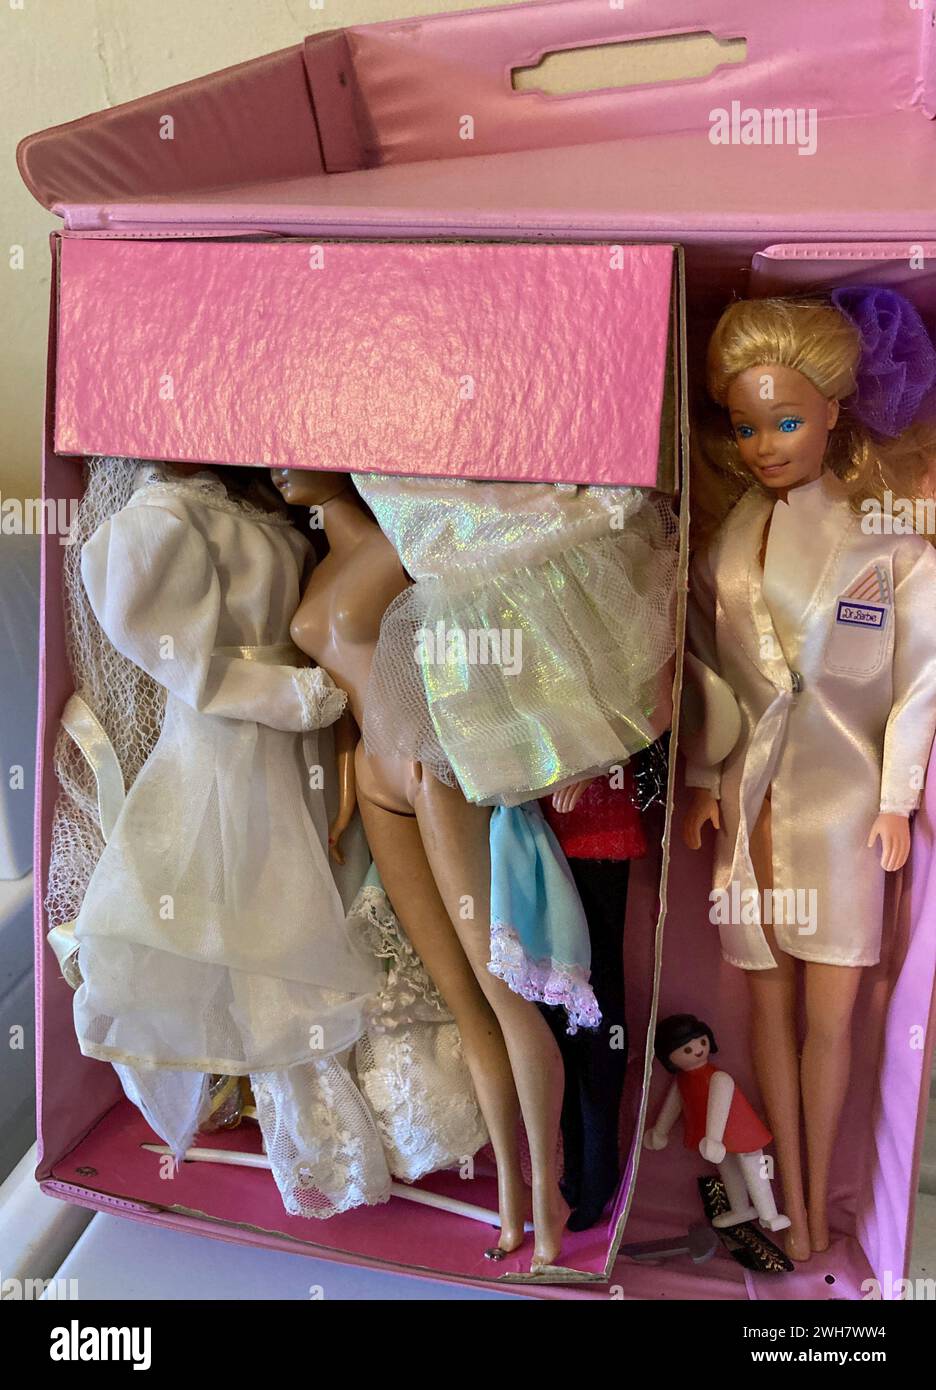 Vintage Barbie doll in pink case Stock Photo